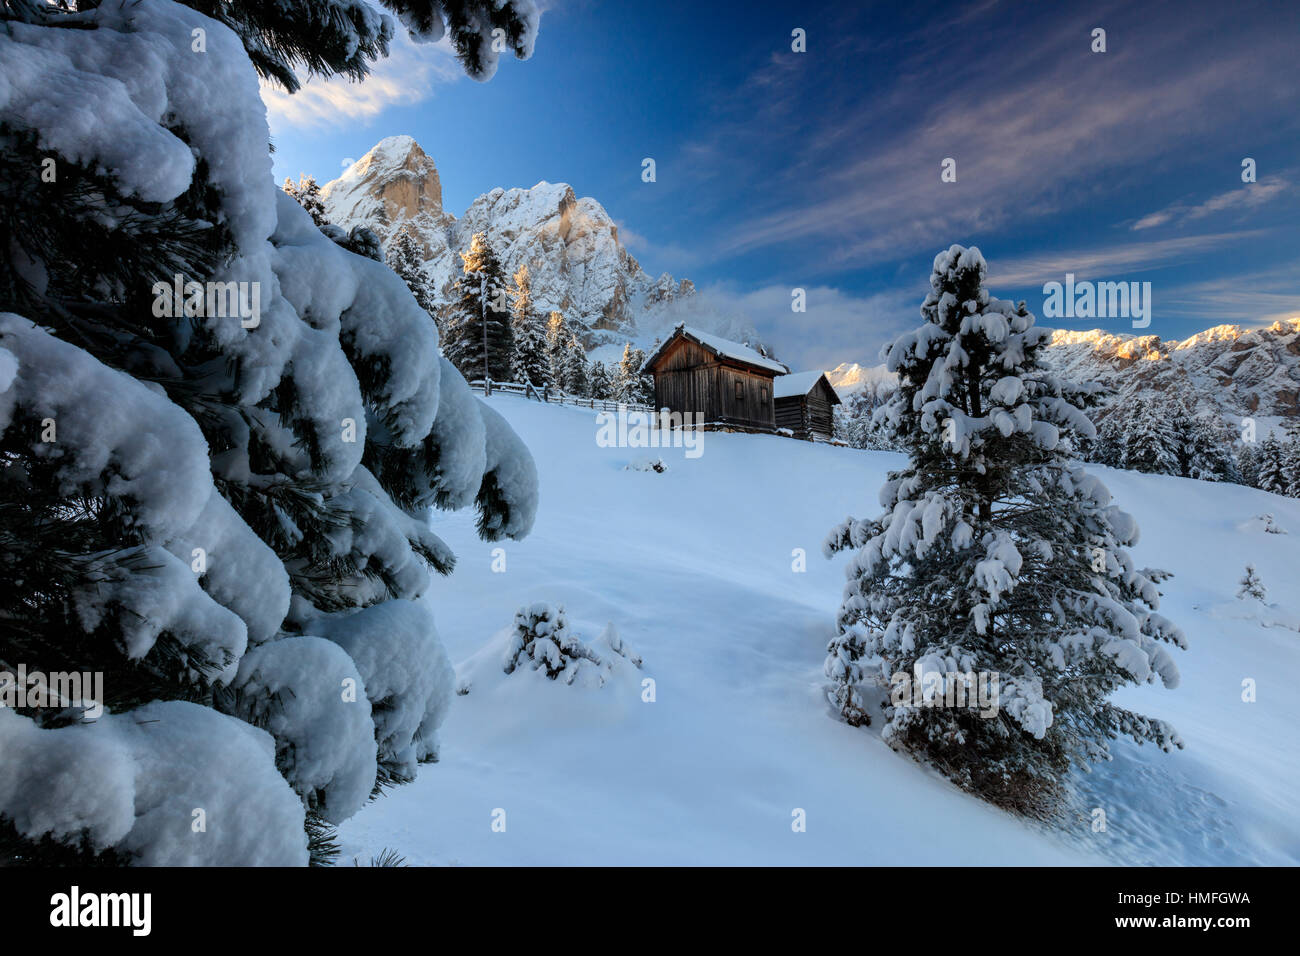 The snowy peak of Sass De Putia frames the wooden hut and woods at dawn, Passo Delle Erbe, Funes Valley, South Tyrol, Italy Stock Photo